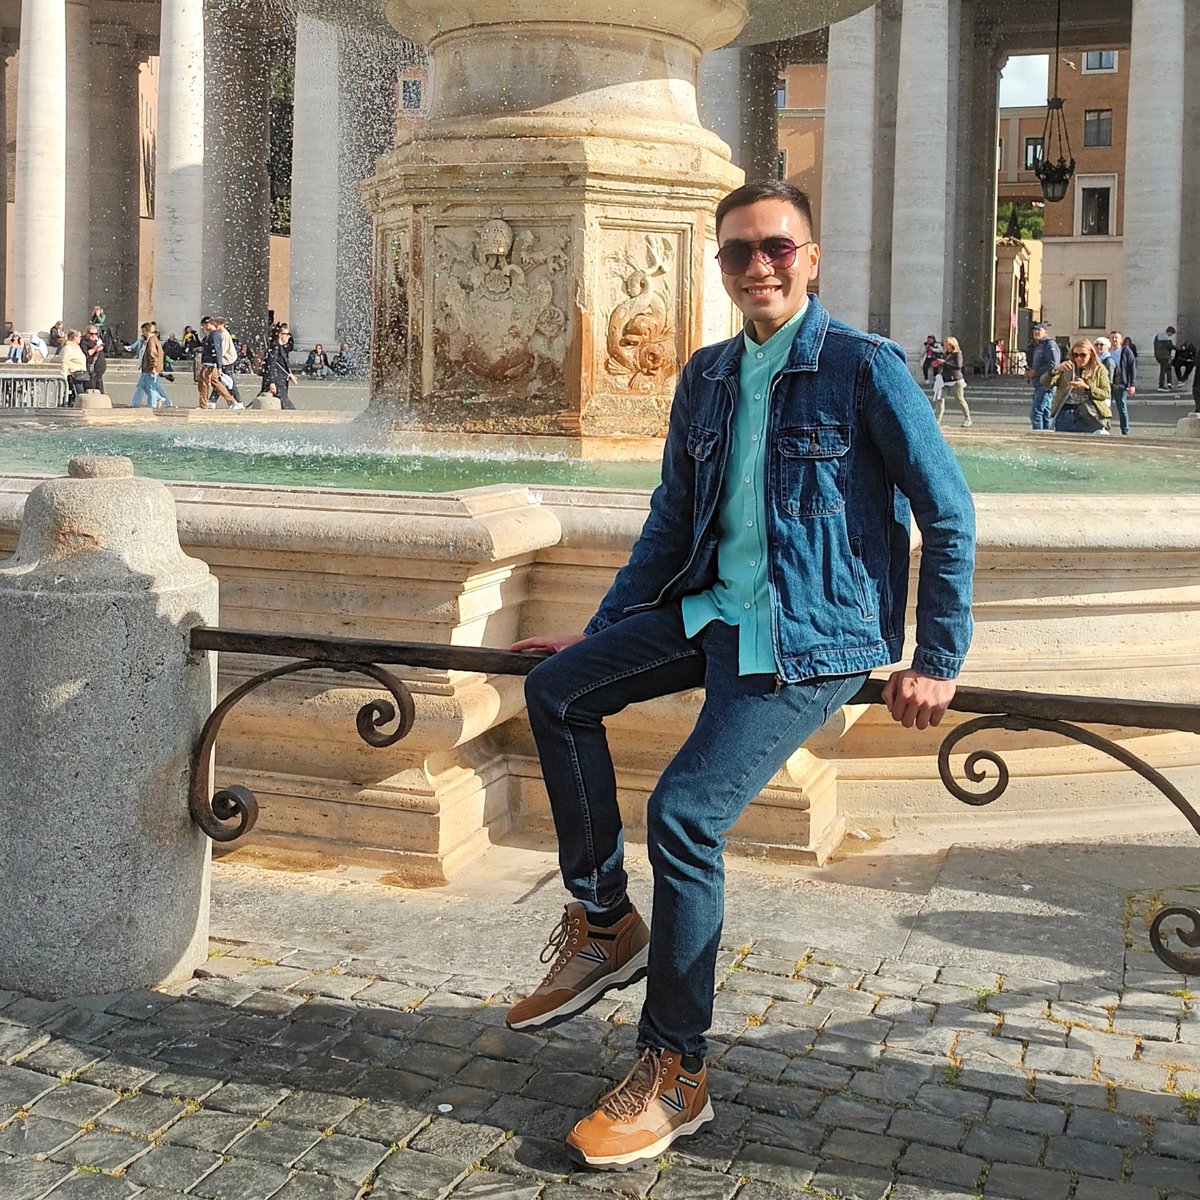 A brief respite in The Vatican 🇻🇦grants a sojourner the time to reflect on the ancient doctrine that traces the knowledge that all roads lead to Rome 🇮🇹. 

#VaticanCity #TheVatican #Rome #Italy #Italia 
#NewProfilePic